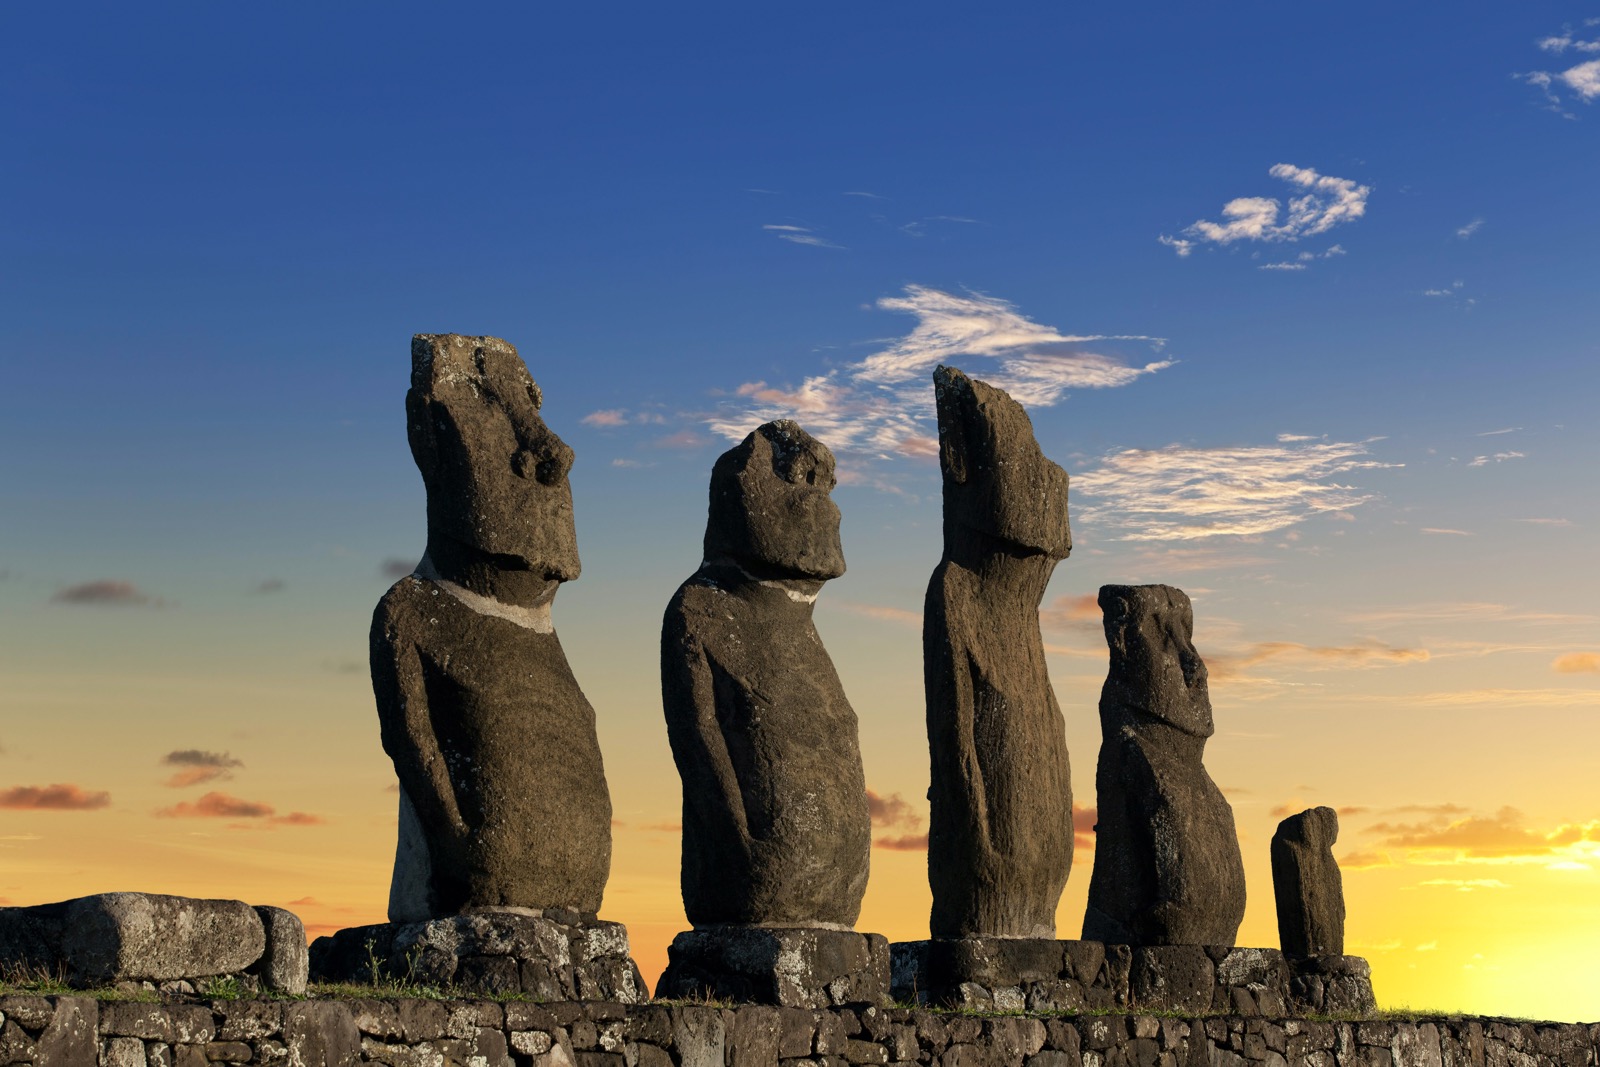 E In Geography Quiz Moai statues, Easter Island